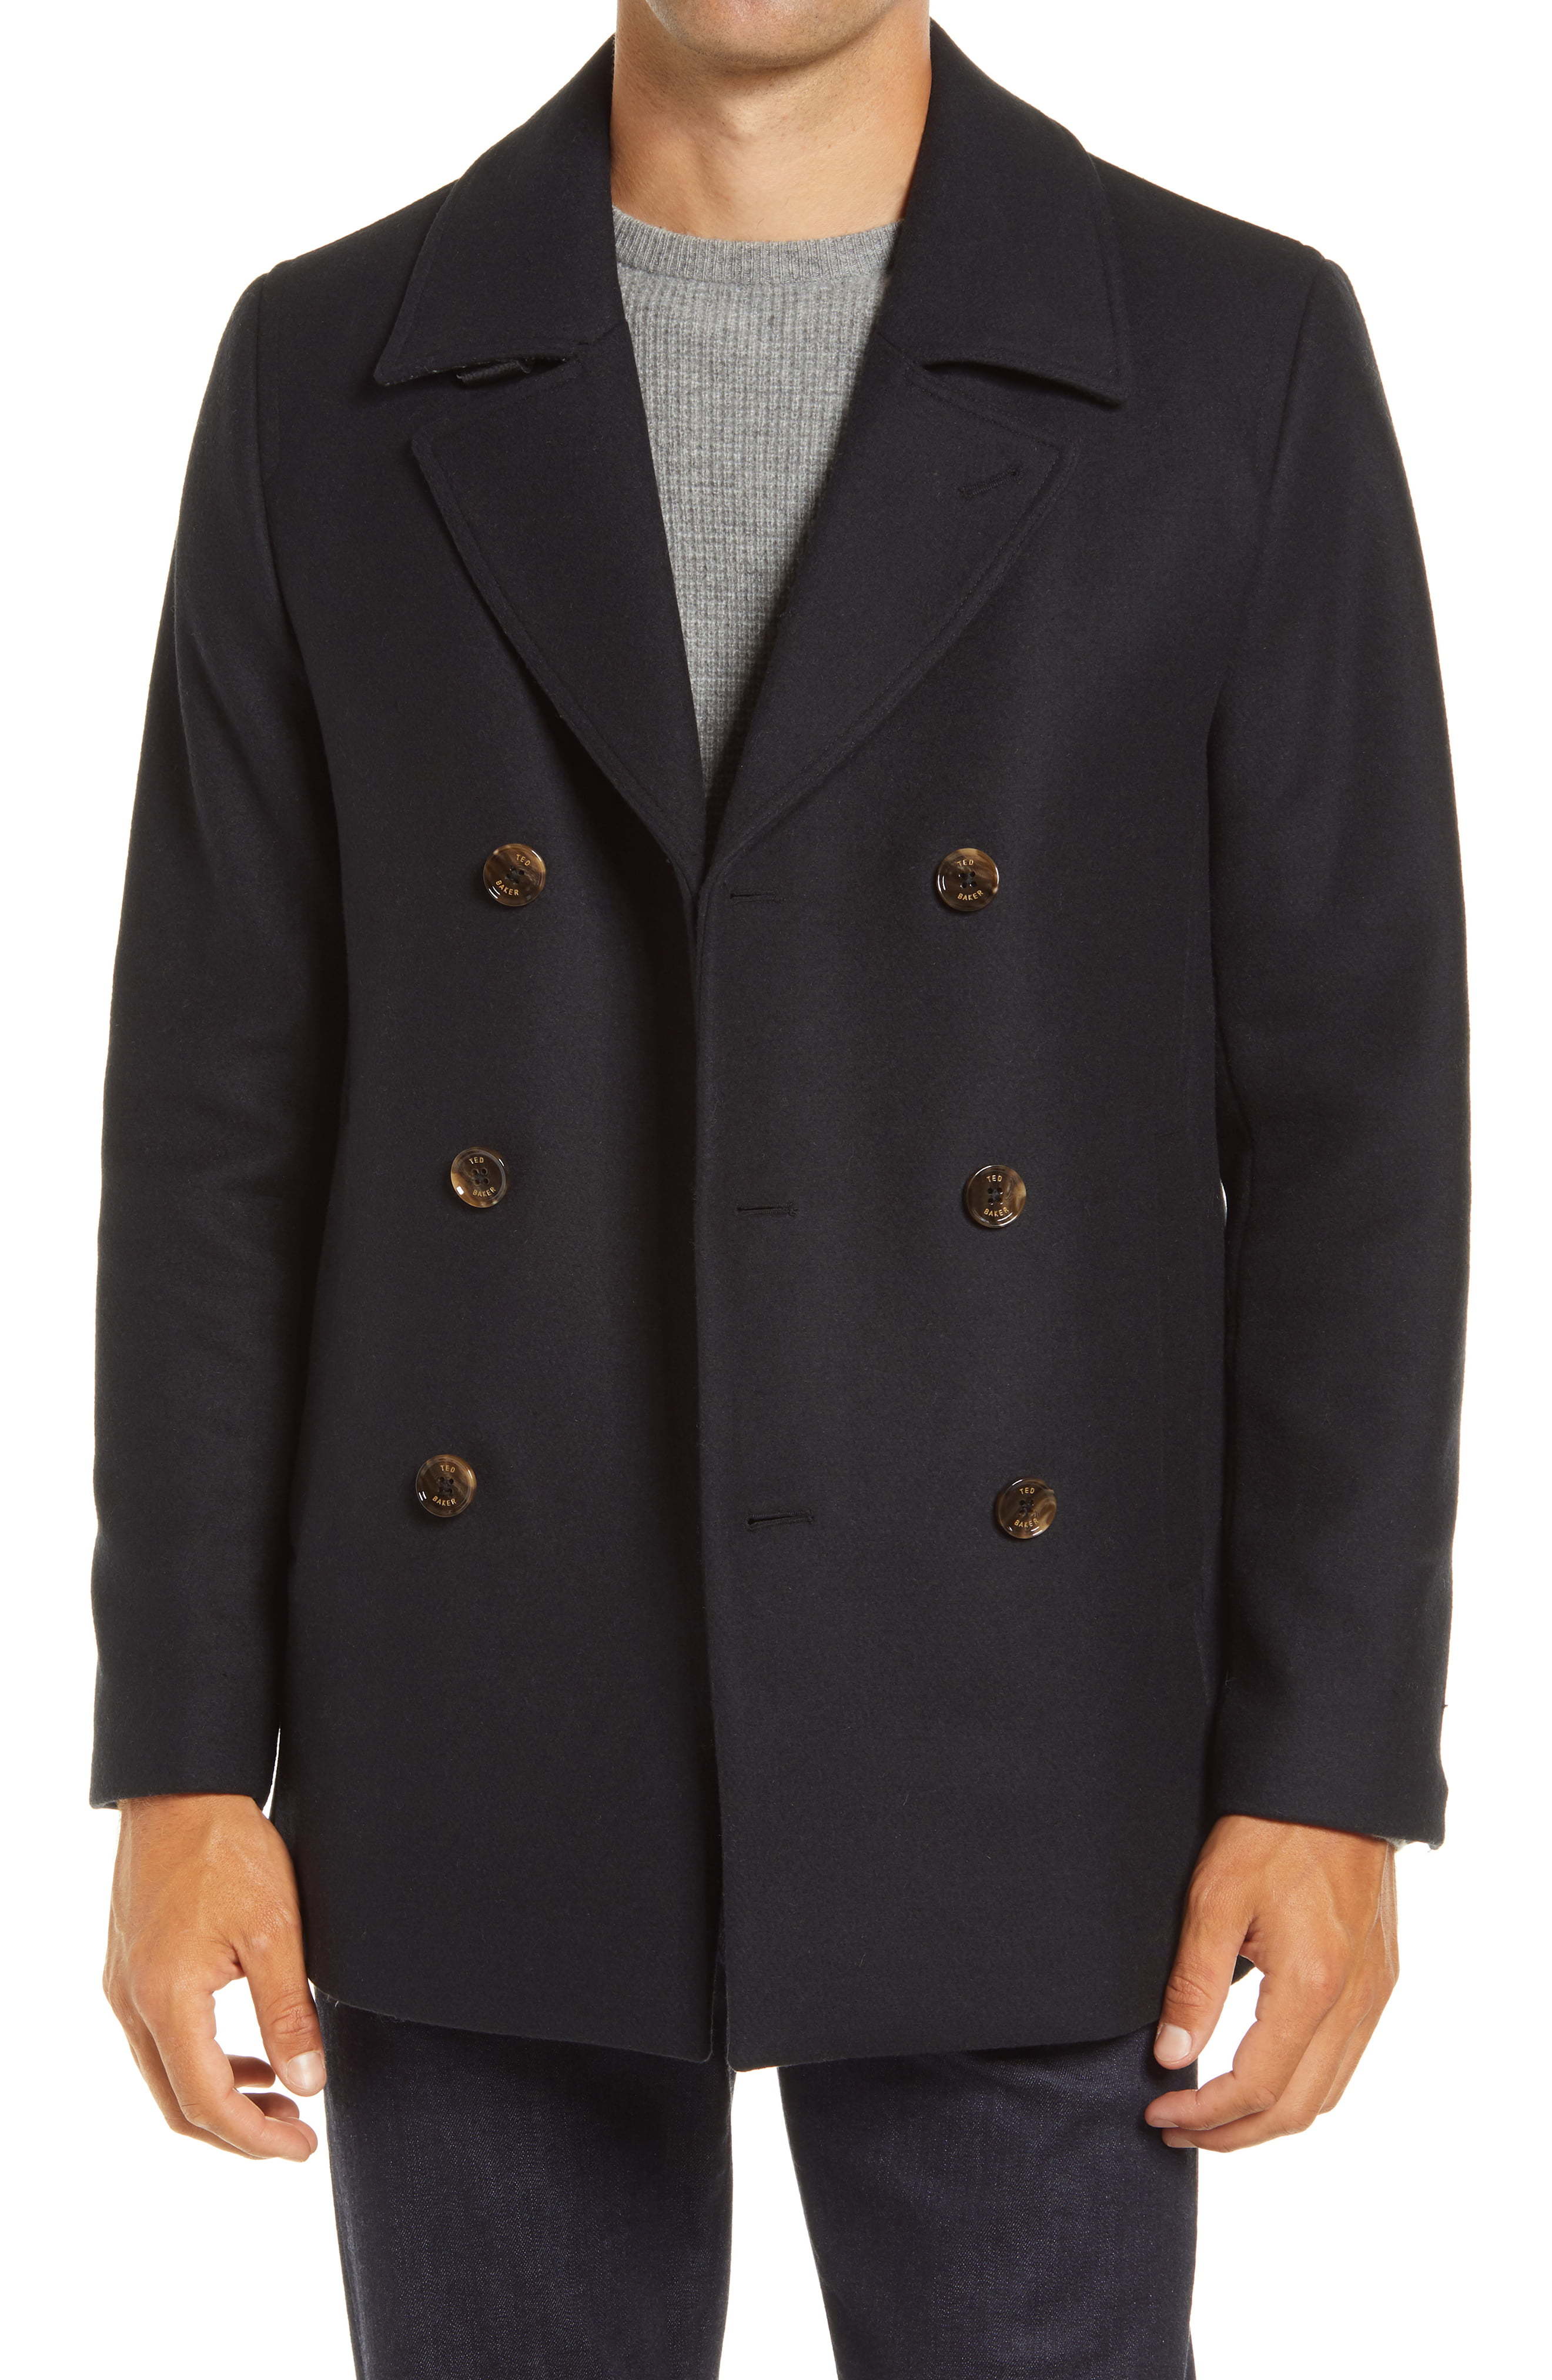 Ted Baker London Summit Double Breasted Wool Blend Jacket, $209 ...